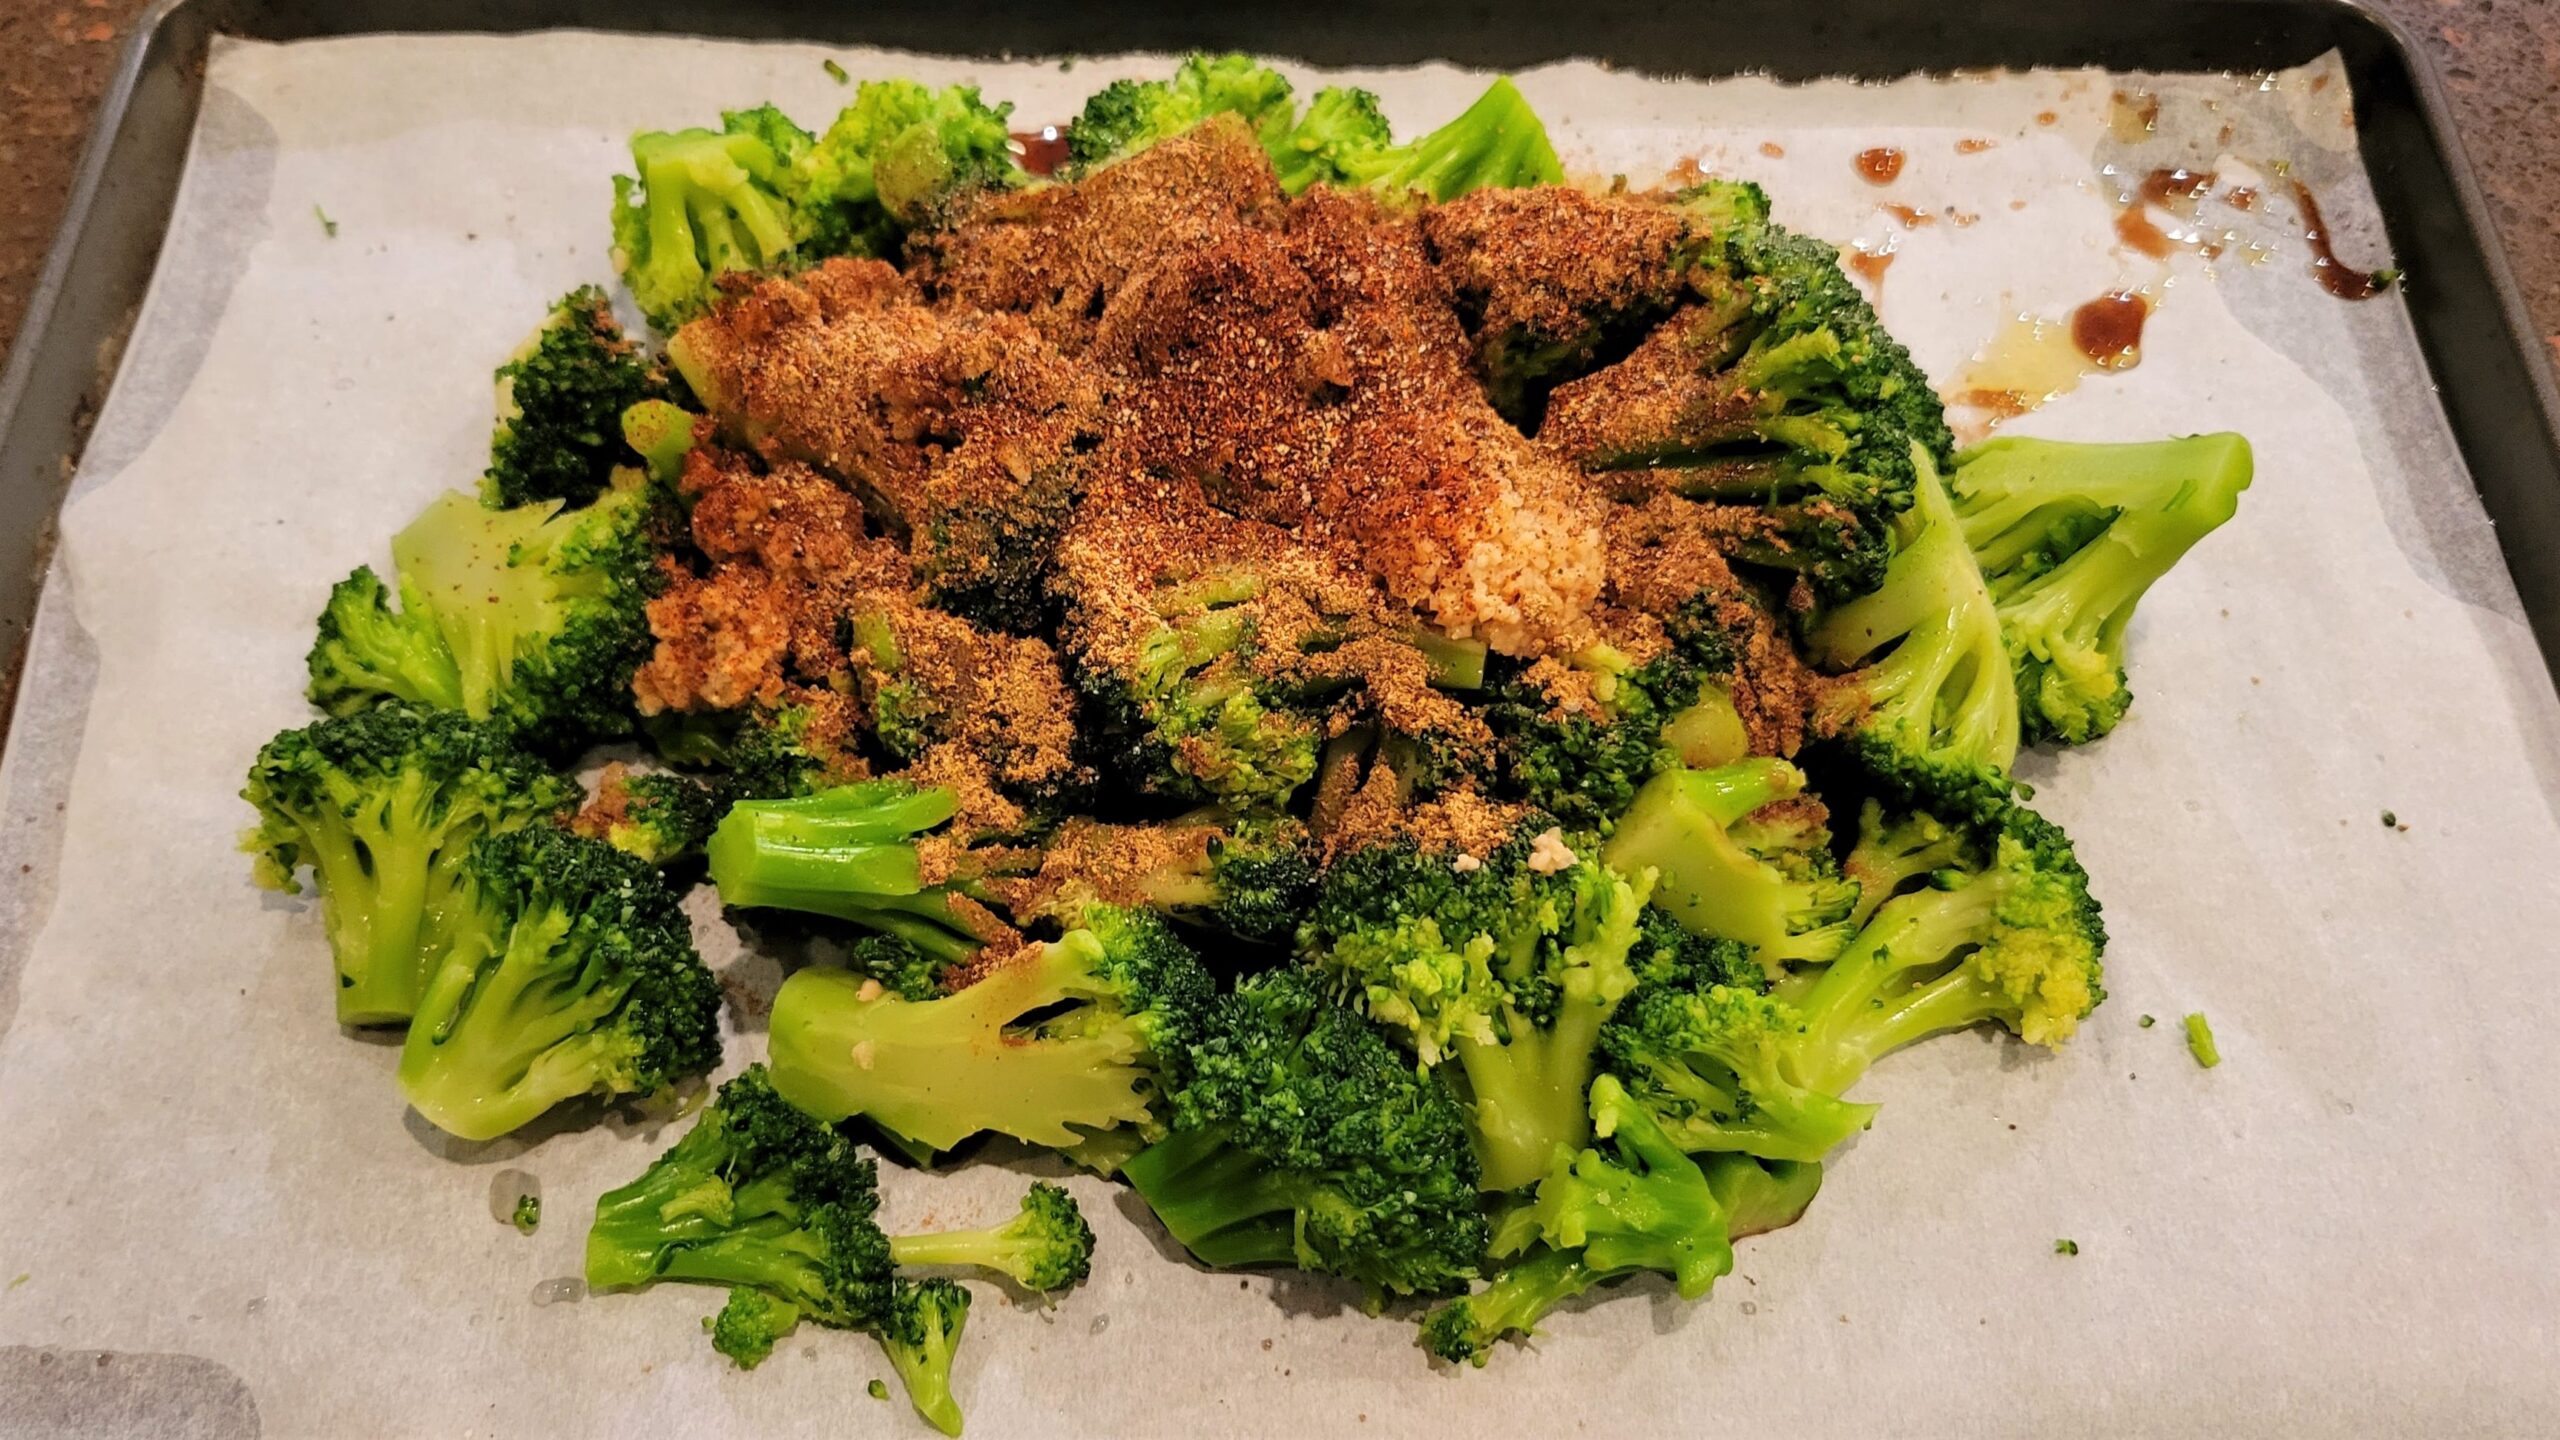 Broccoli - Dining in with Danielle